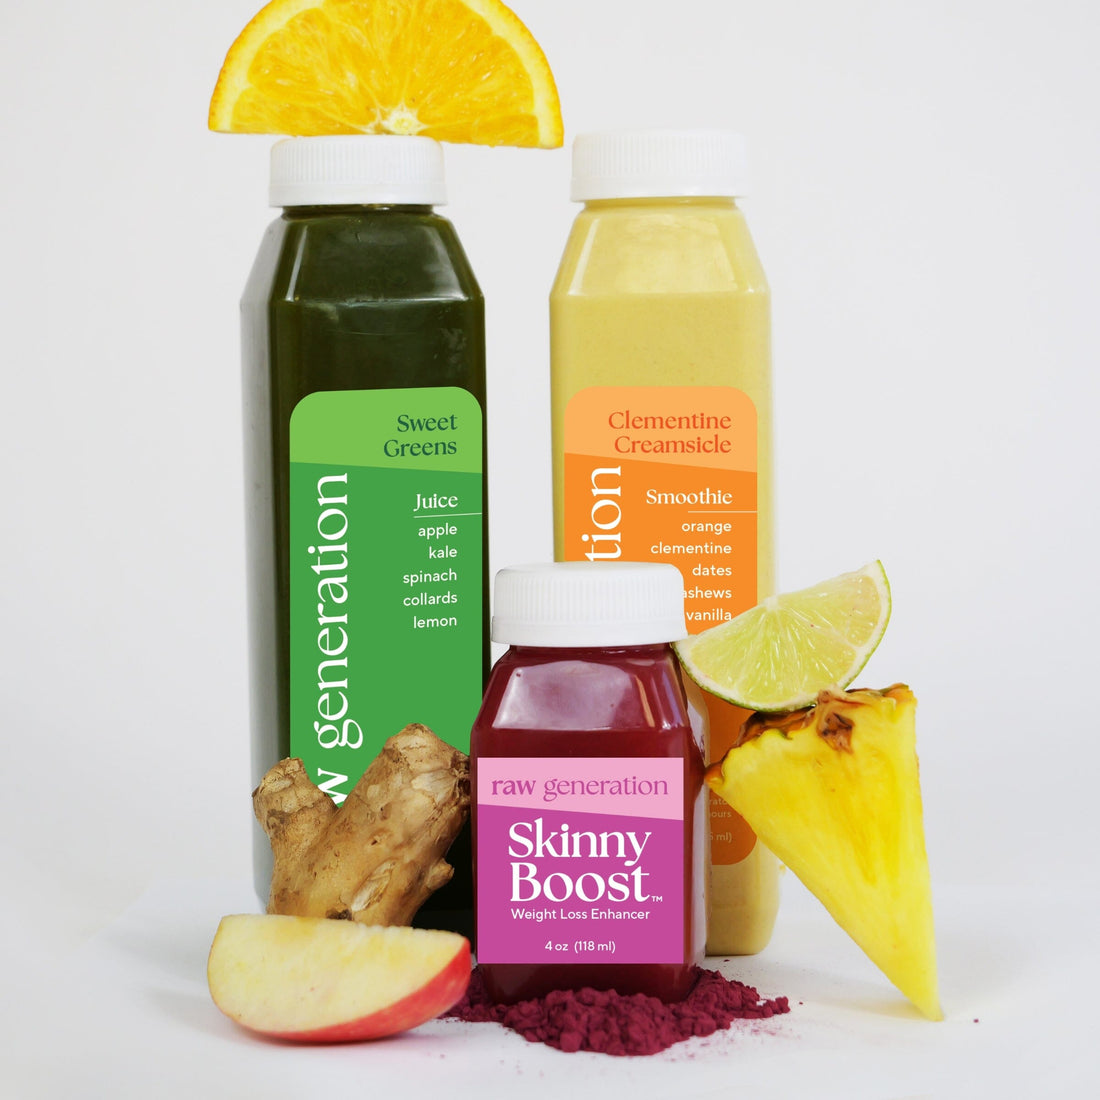 sweet greens, clementine creamsicle smoothie, and a skinny boost shot with fruit